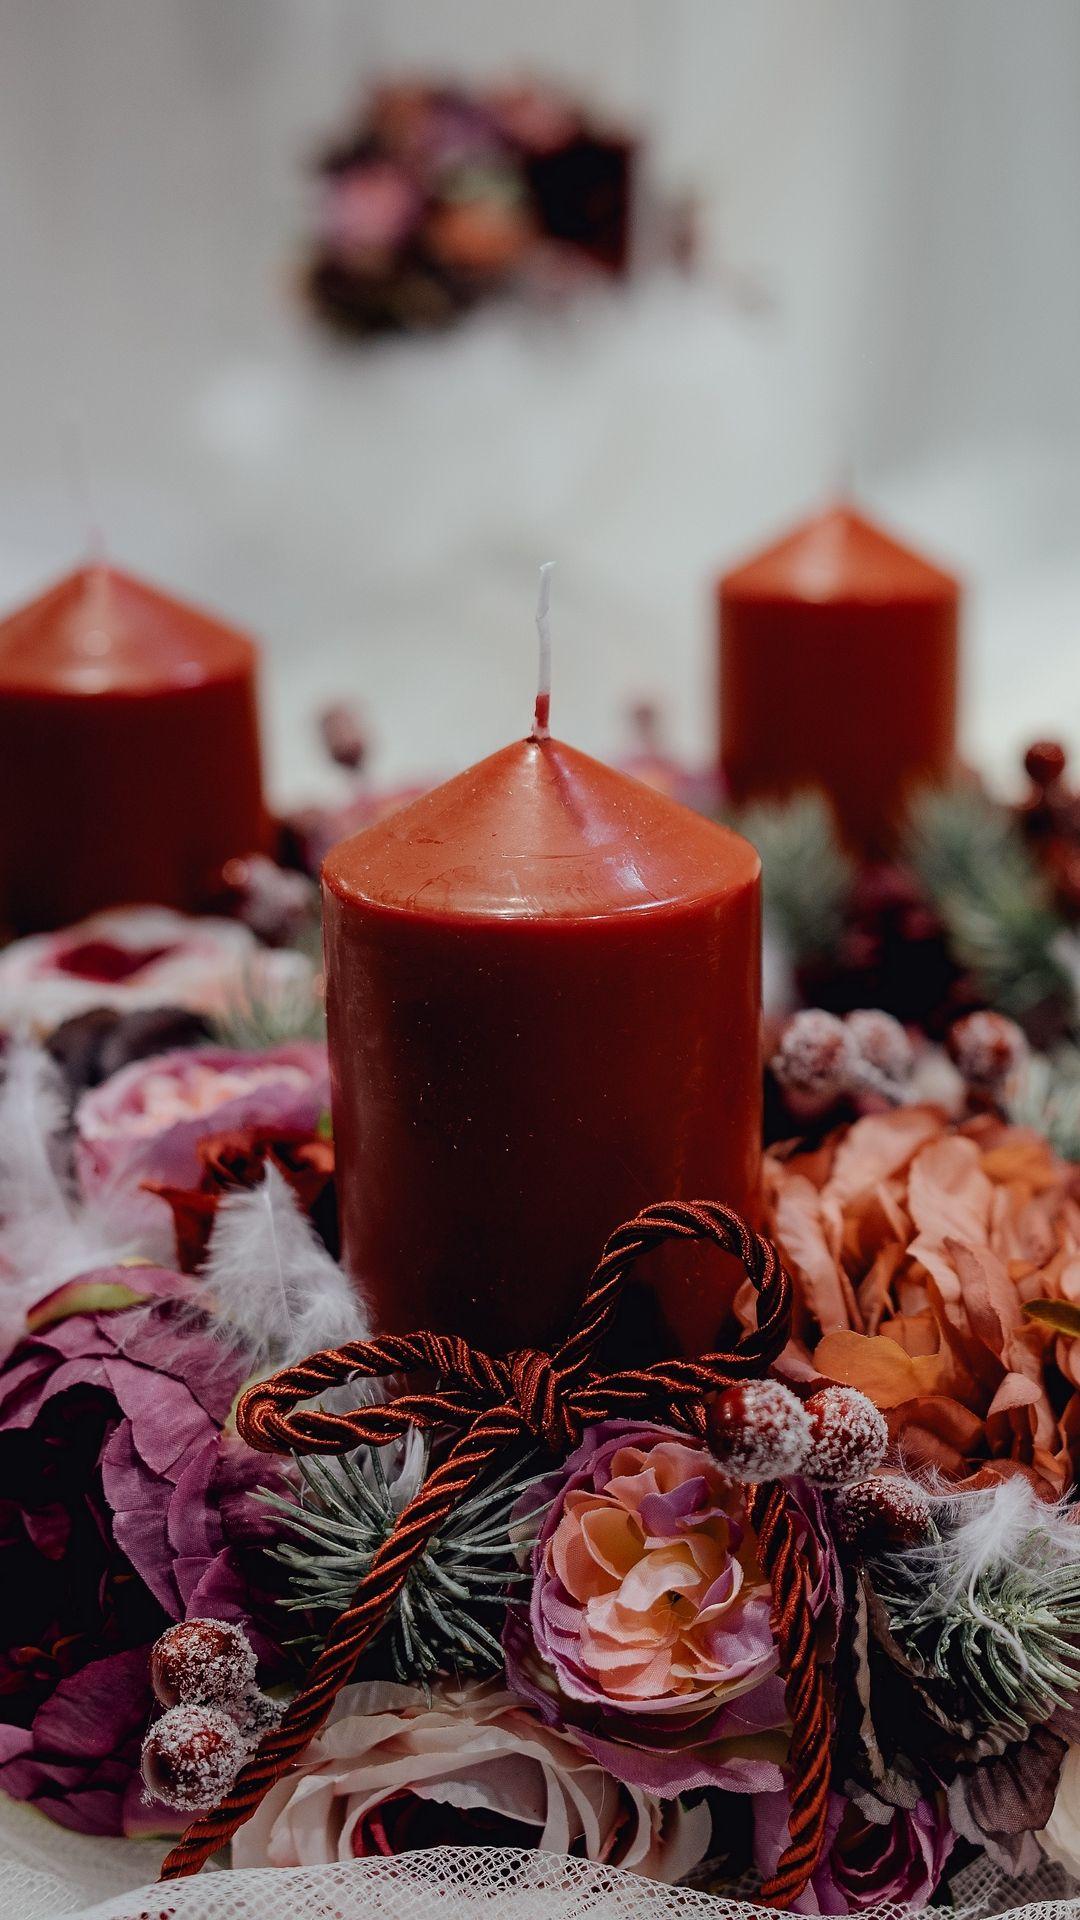 Flowers #composition #candle #new Year #wallpaper #lockscreen